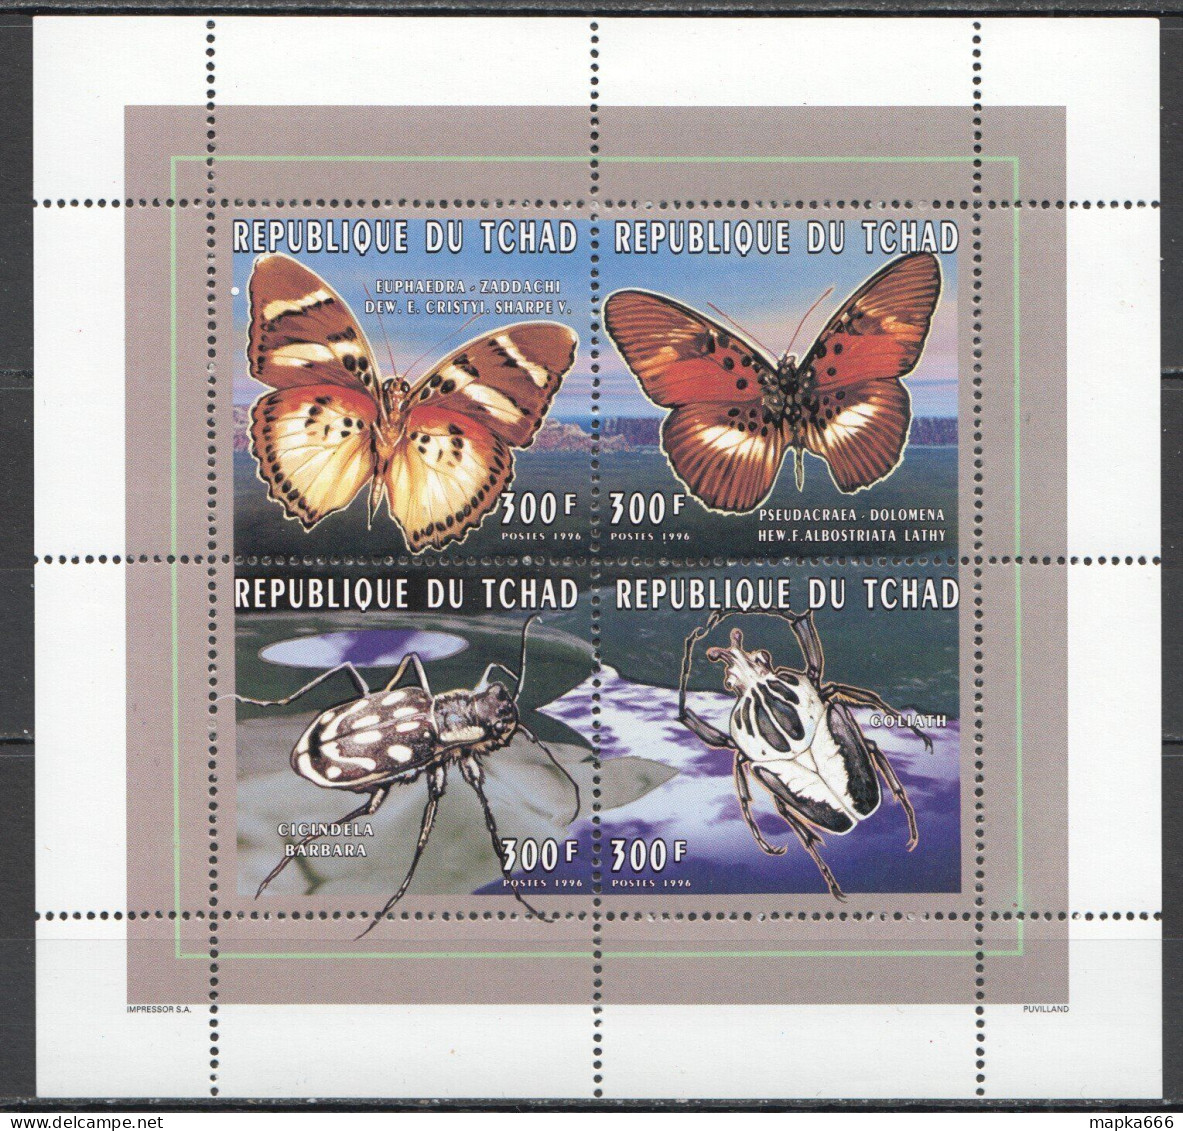 Ft182 1996 Chad Insects & Butterflies Fauna #1391-94 1Kb Mnh - Vlinders